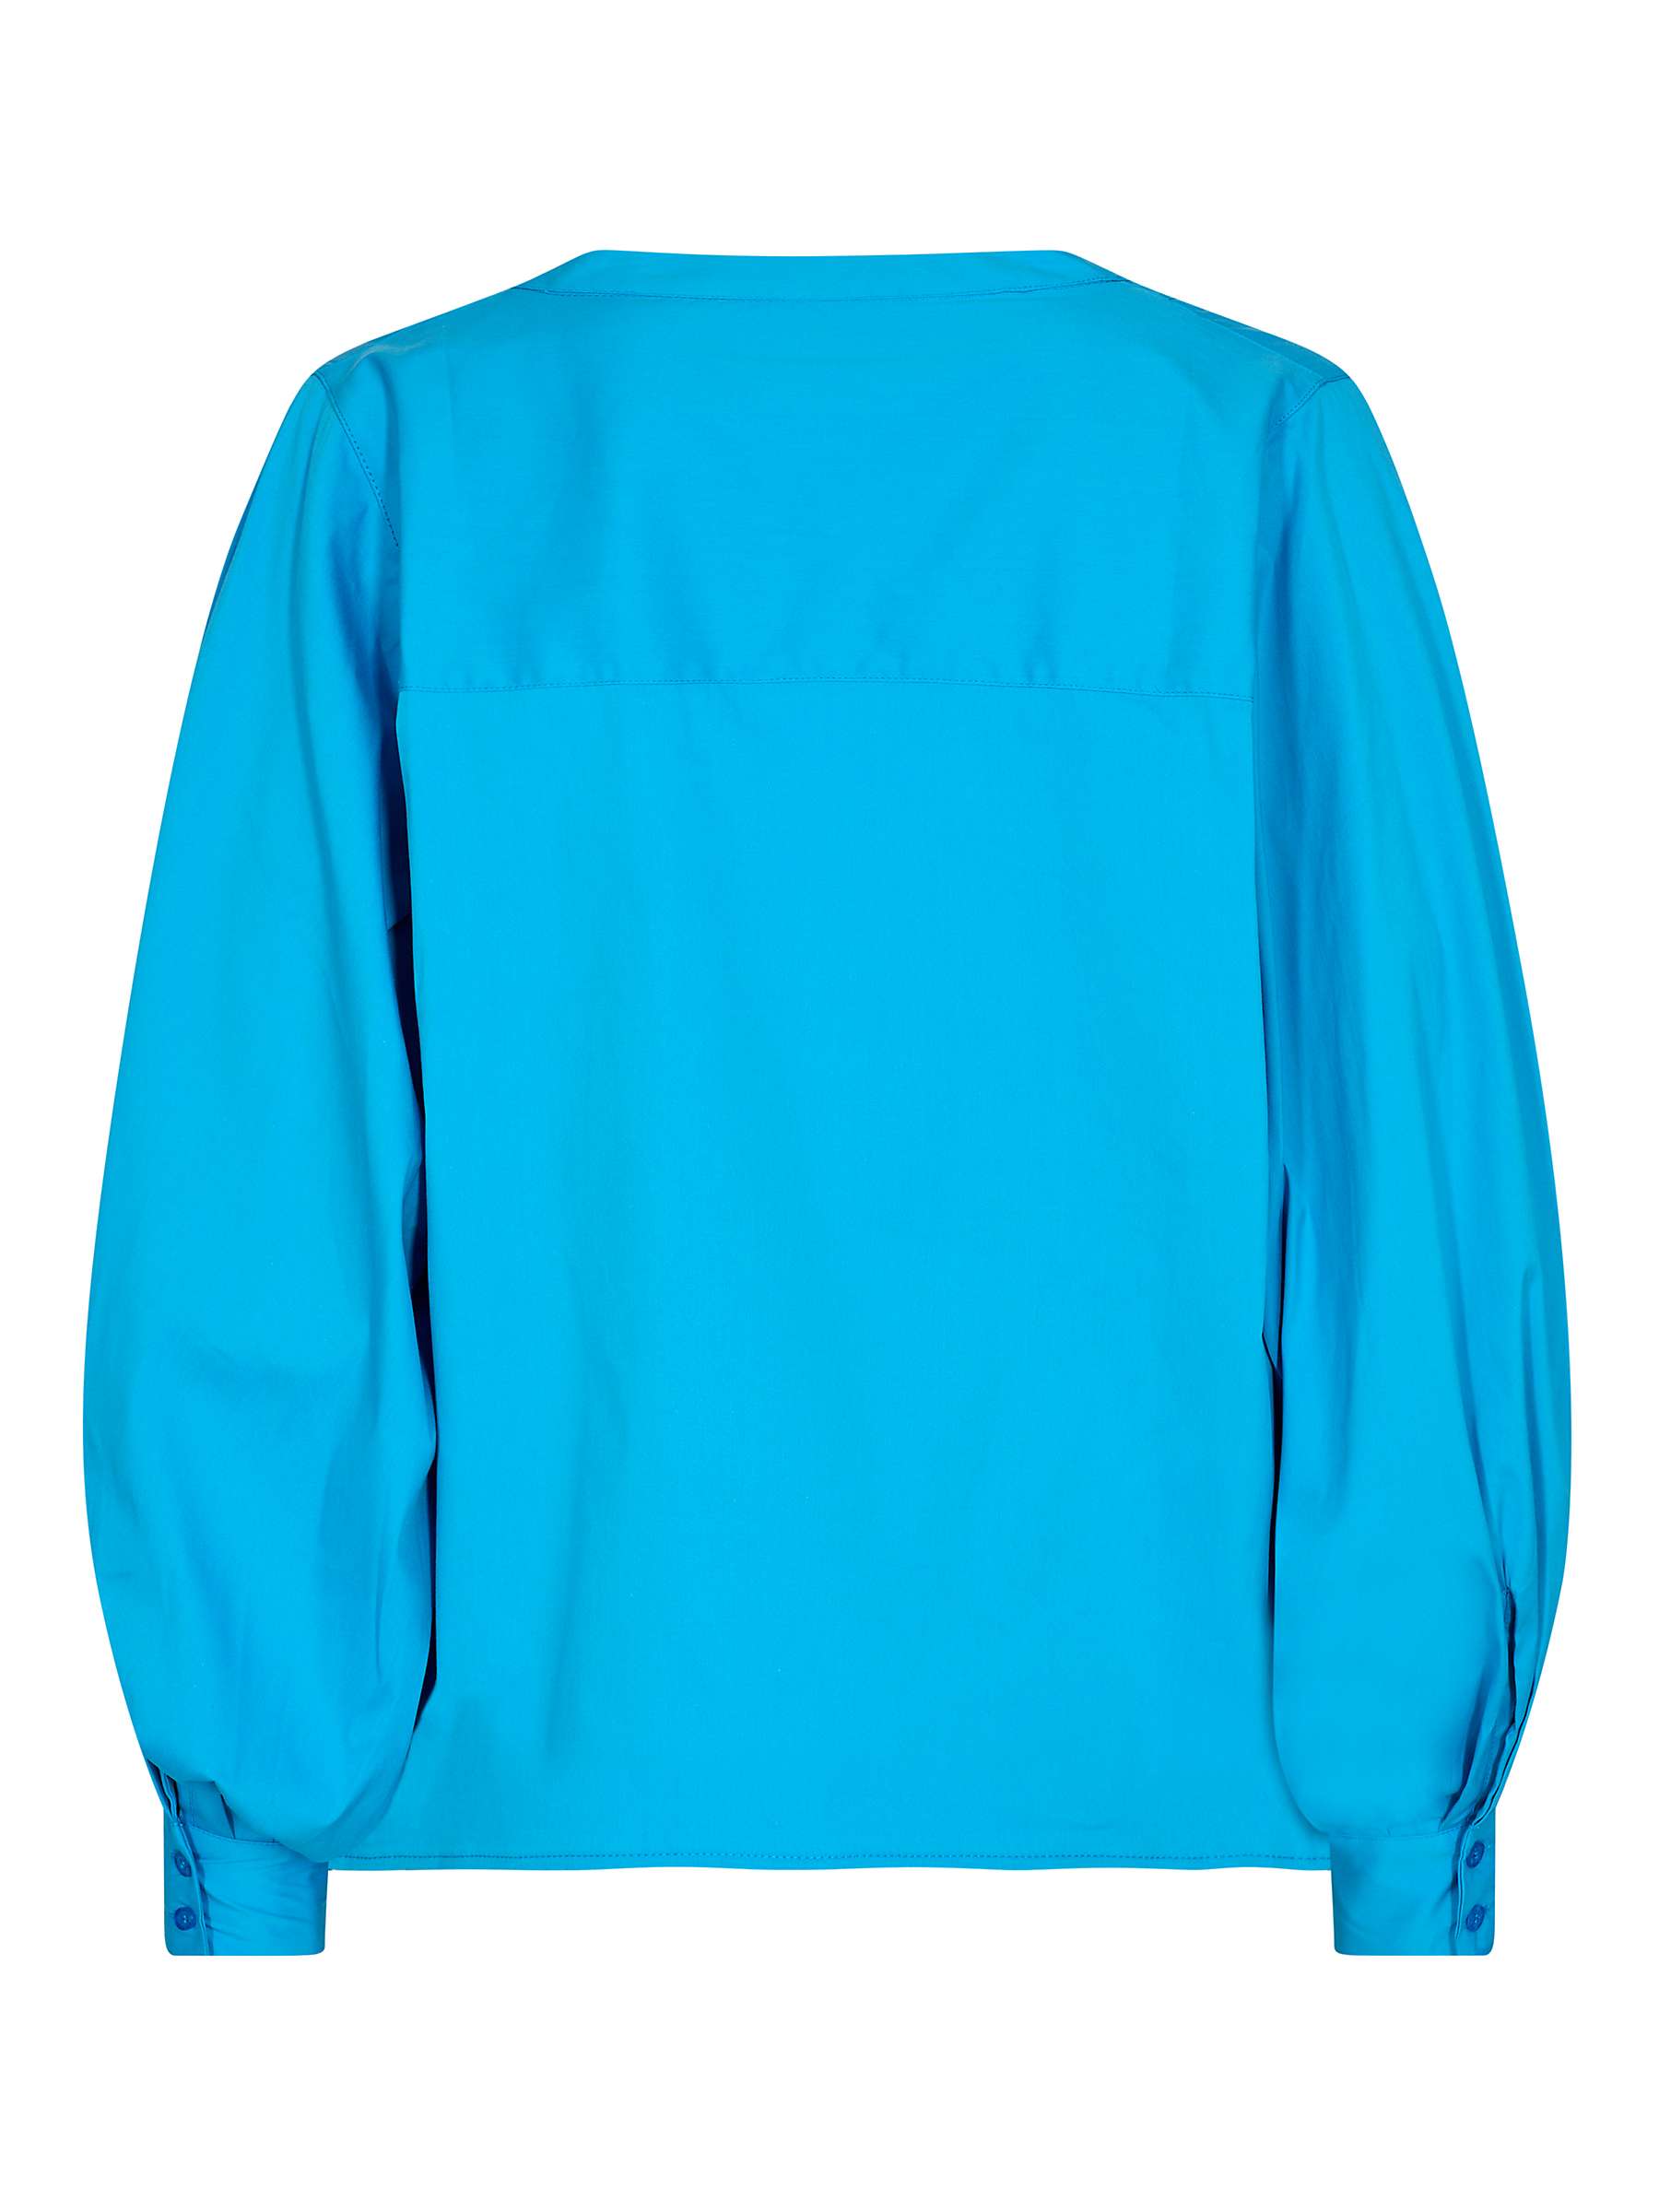 Buy MOS MOSH Yen Relaxed Fit Blouse Online at johnlewis.com